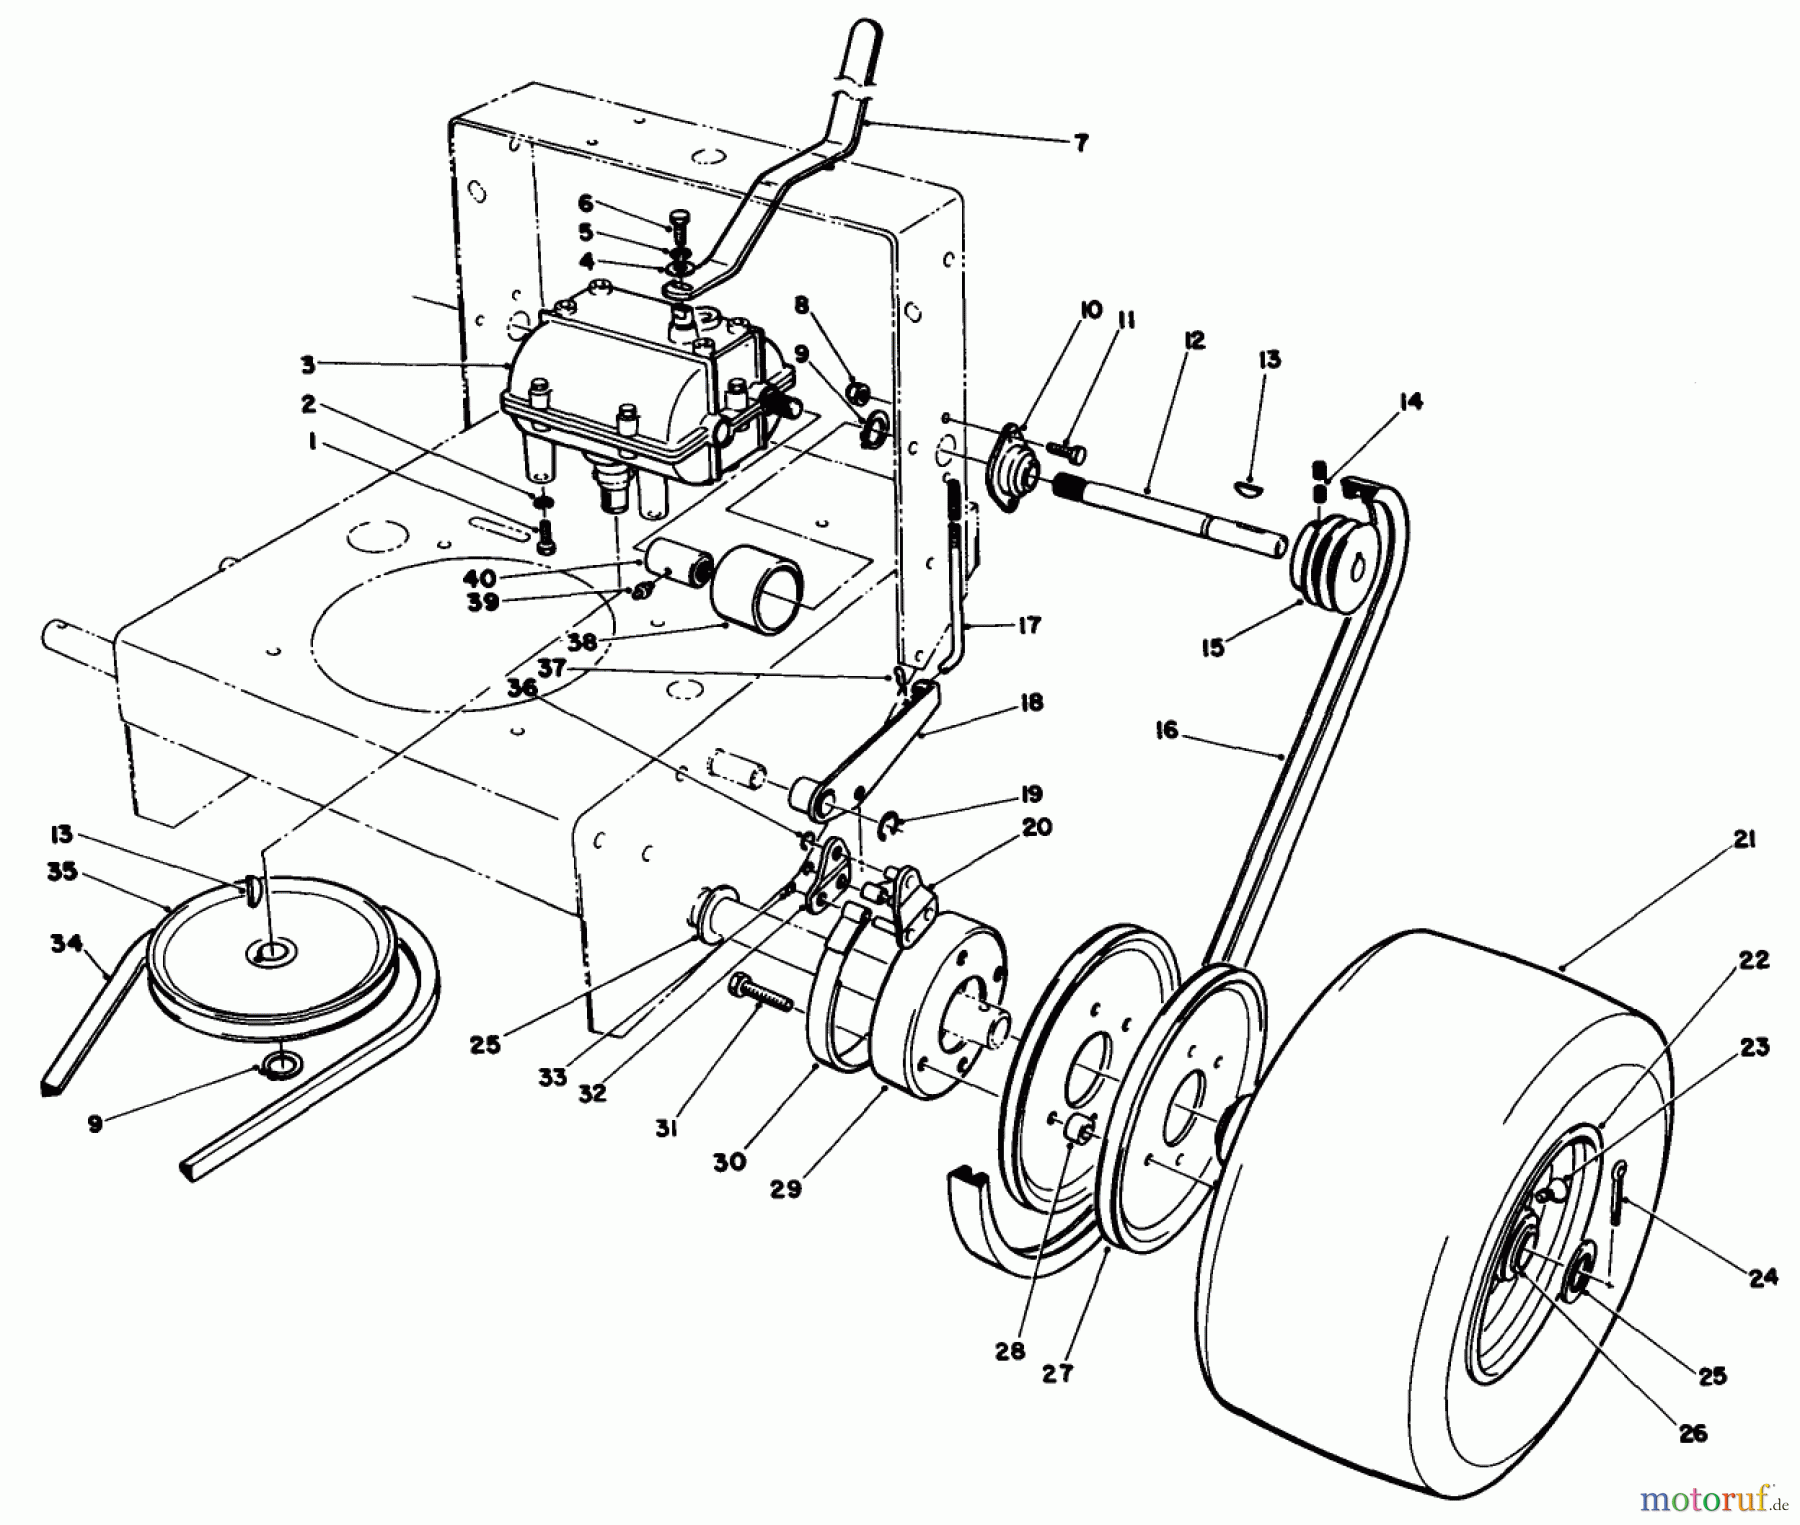  Toro Neu Mowers, Drive Unit Only 30111 - Toro Mid-Size Proline Gear Traction Unit, 11 hp, 1984 (4000001-4999999) AXLE ASSEMBLY